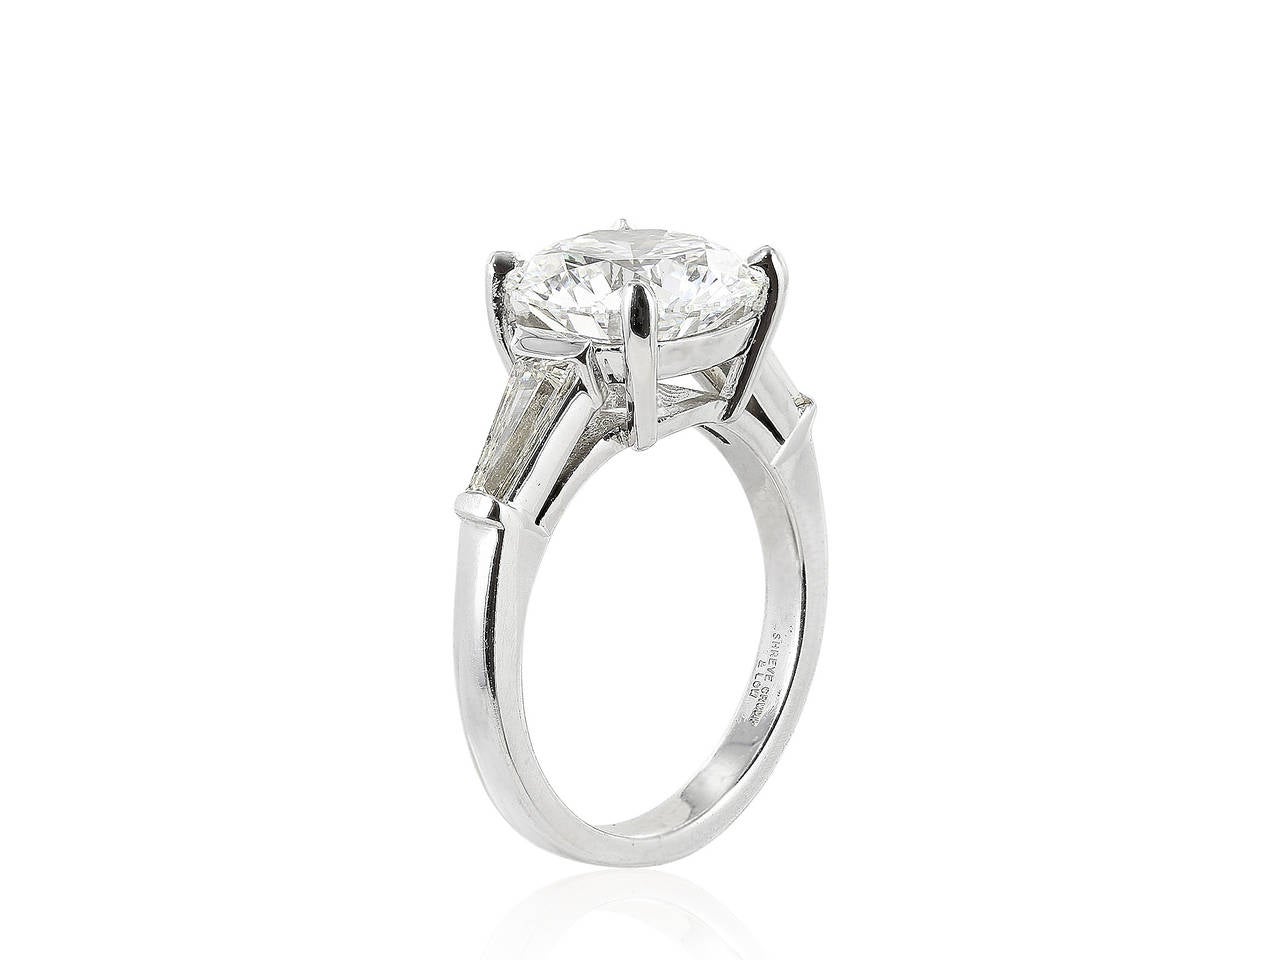 Platinum three stone engagement ring consisting of 1 round brilliant cut diamond, weighing 4.04 carats, measuring 10.36 x 10.30 x 6.17, having a color and clarity of E/SI1 with GIA certificate #1152758941, with cut polish and symmetry grades of EX